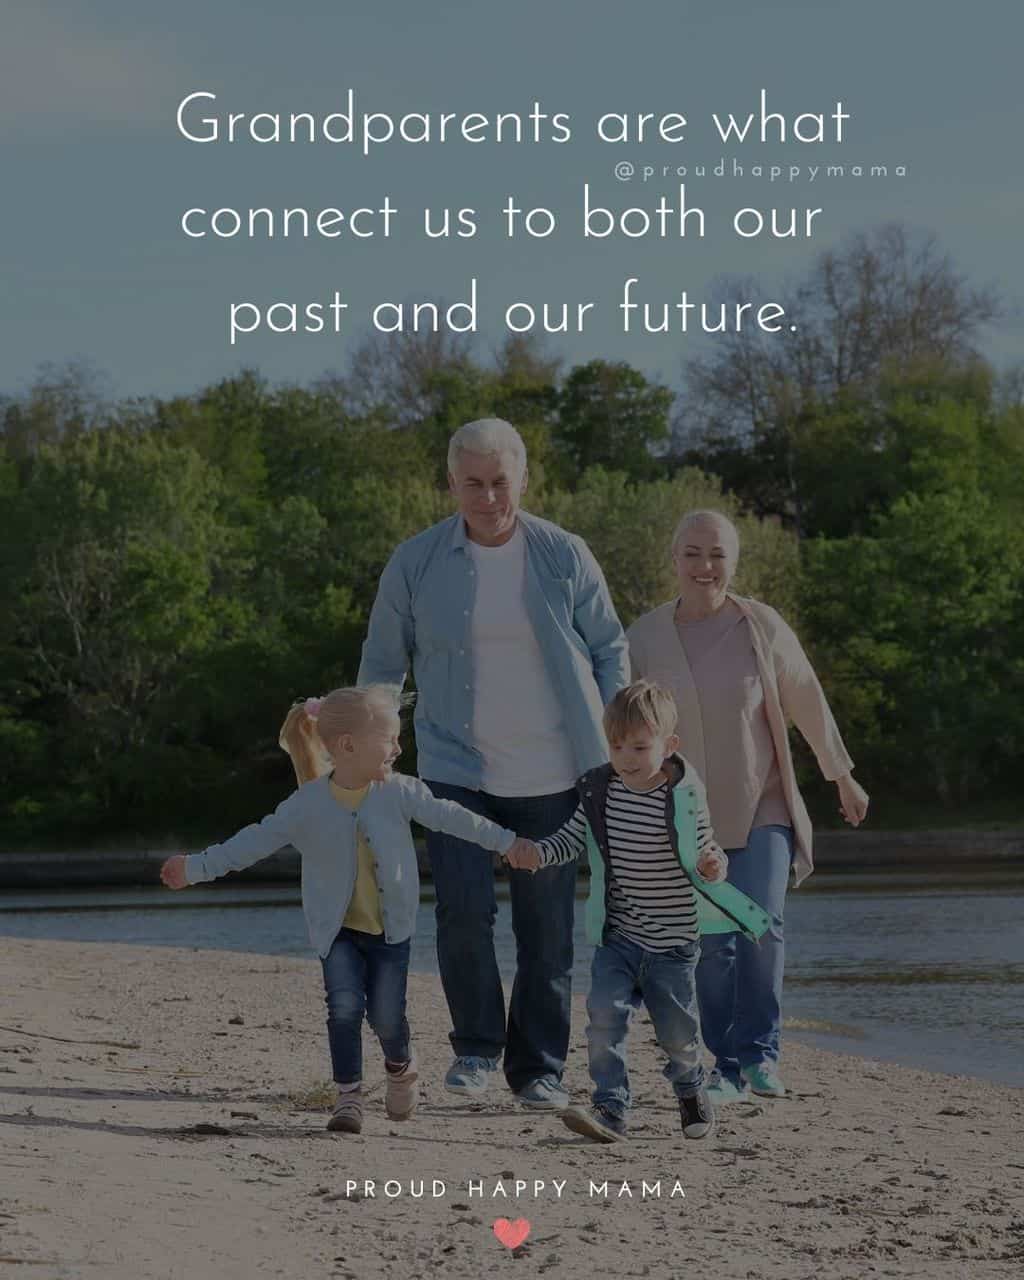 Grandparent Quotes – Grandparents are what connect us to both our past and our future.’